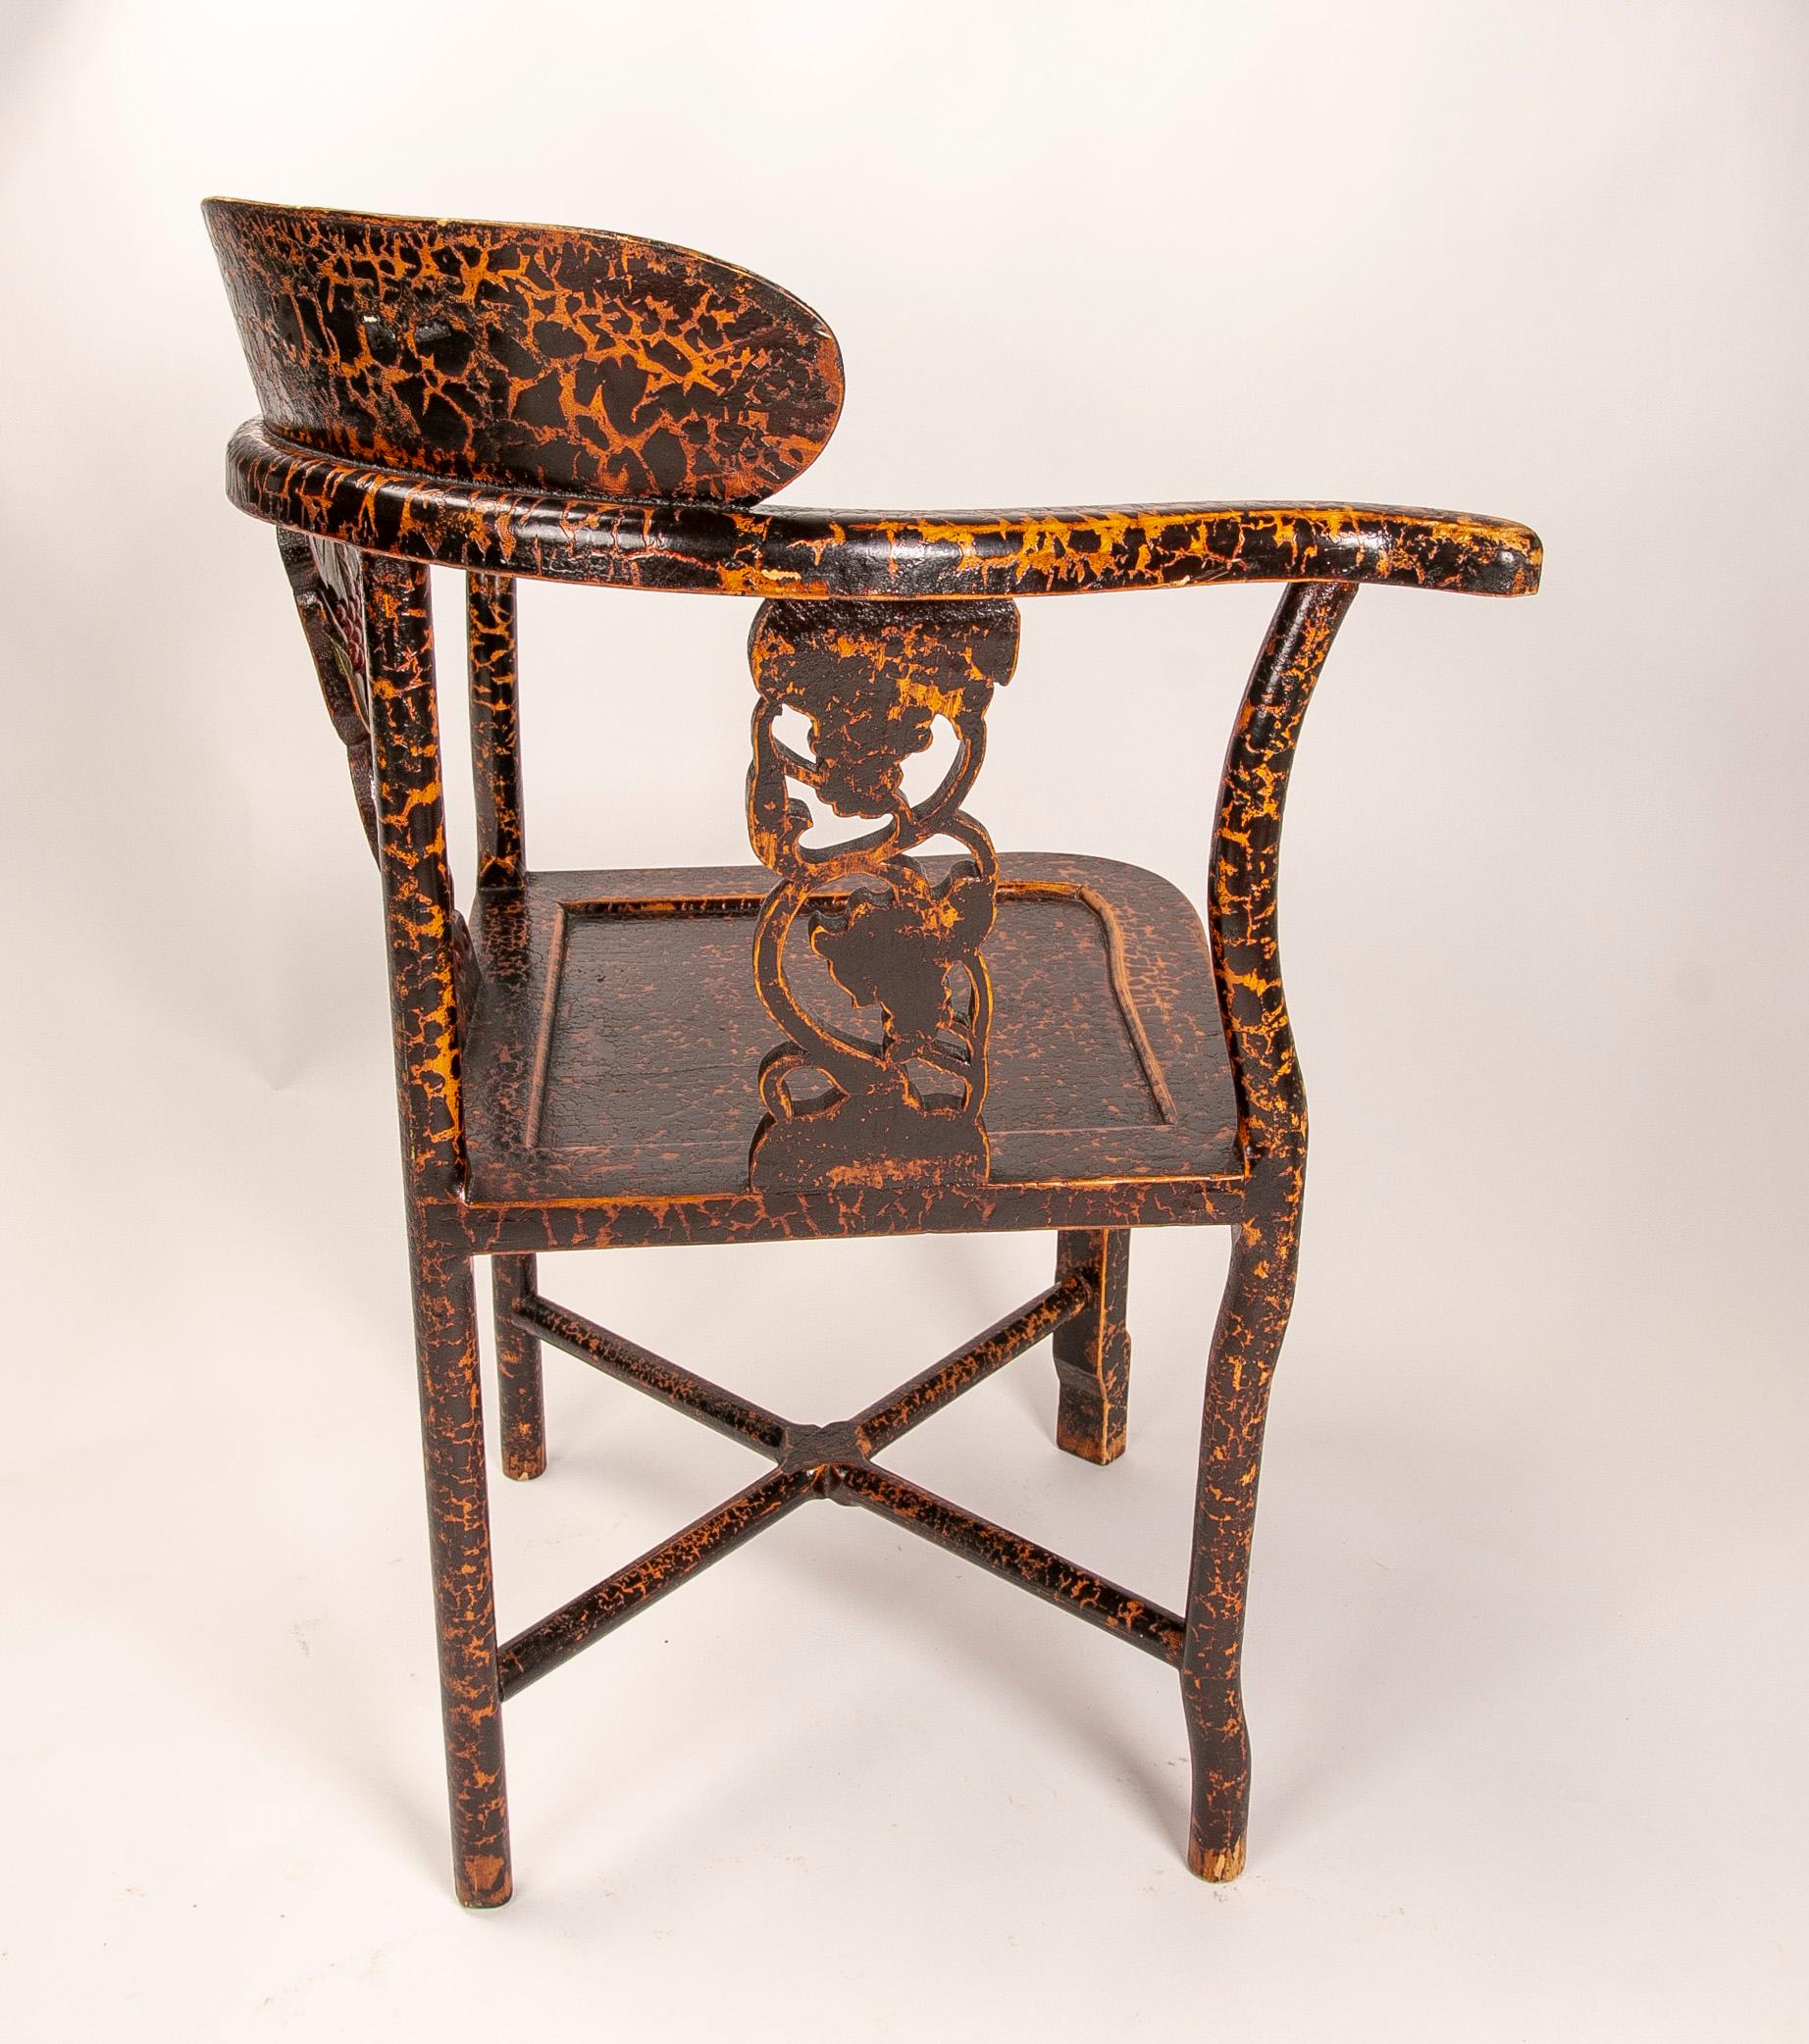 Corner chair with lacquered wooden arms and carved flowers on the backrest.